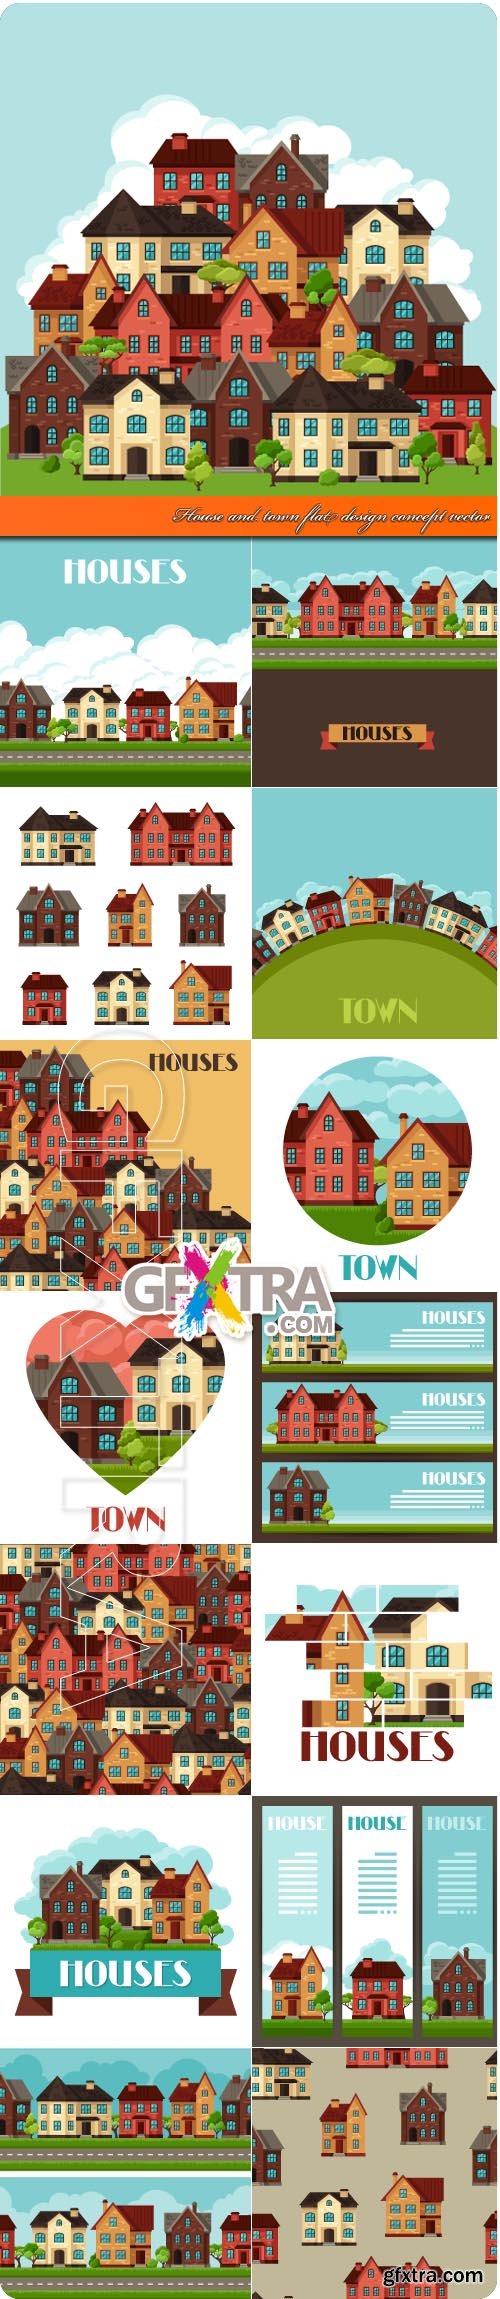 House and town flat design concept vector